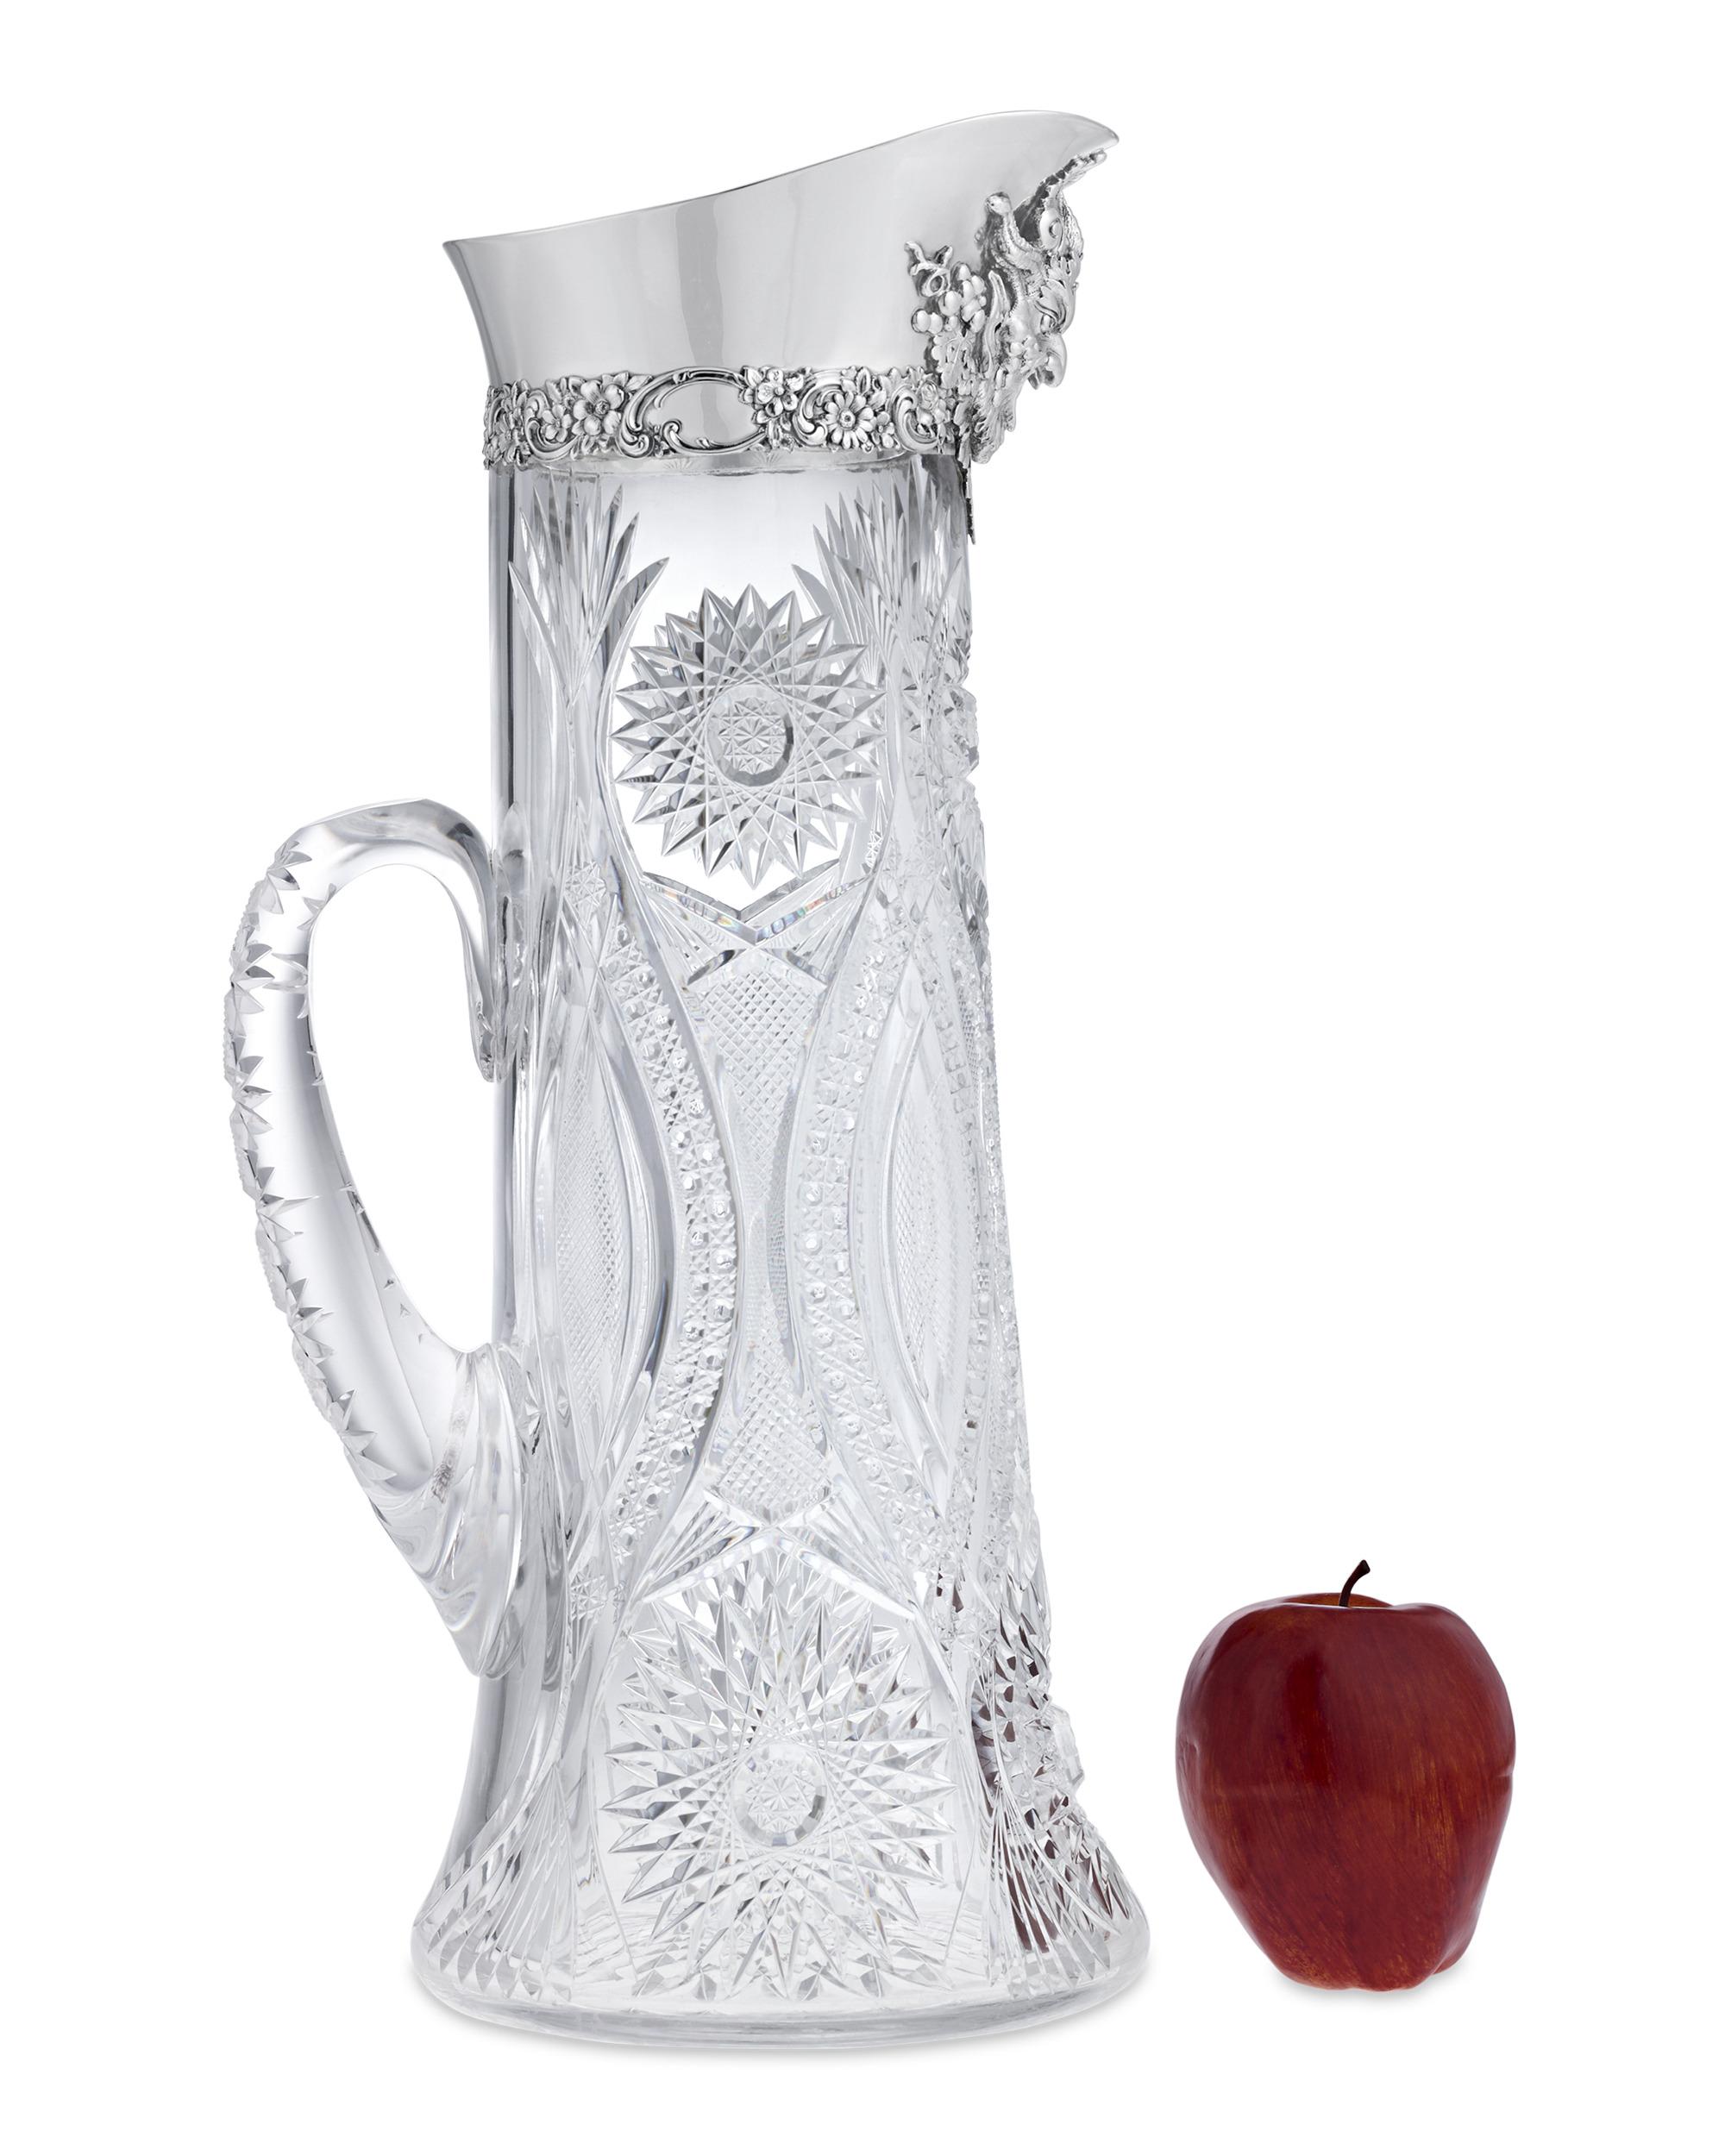 20th Century Tiffany & Co. Silver And Cut Glass Pitcher For Sale